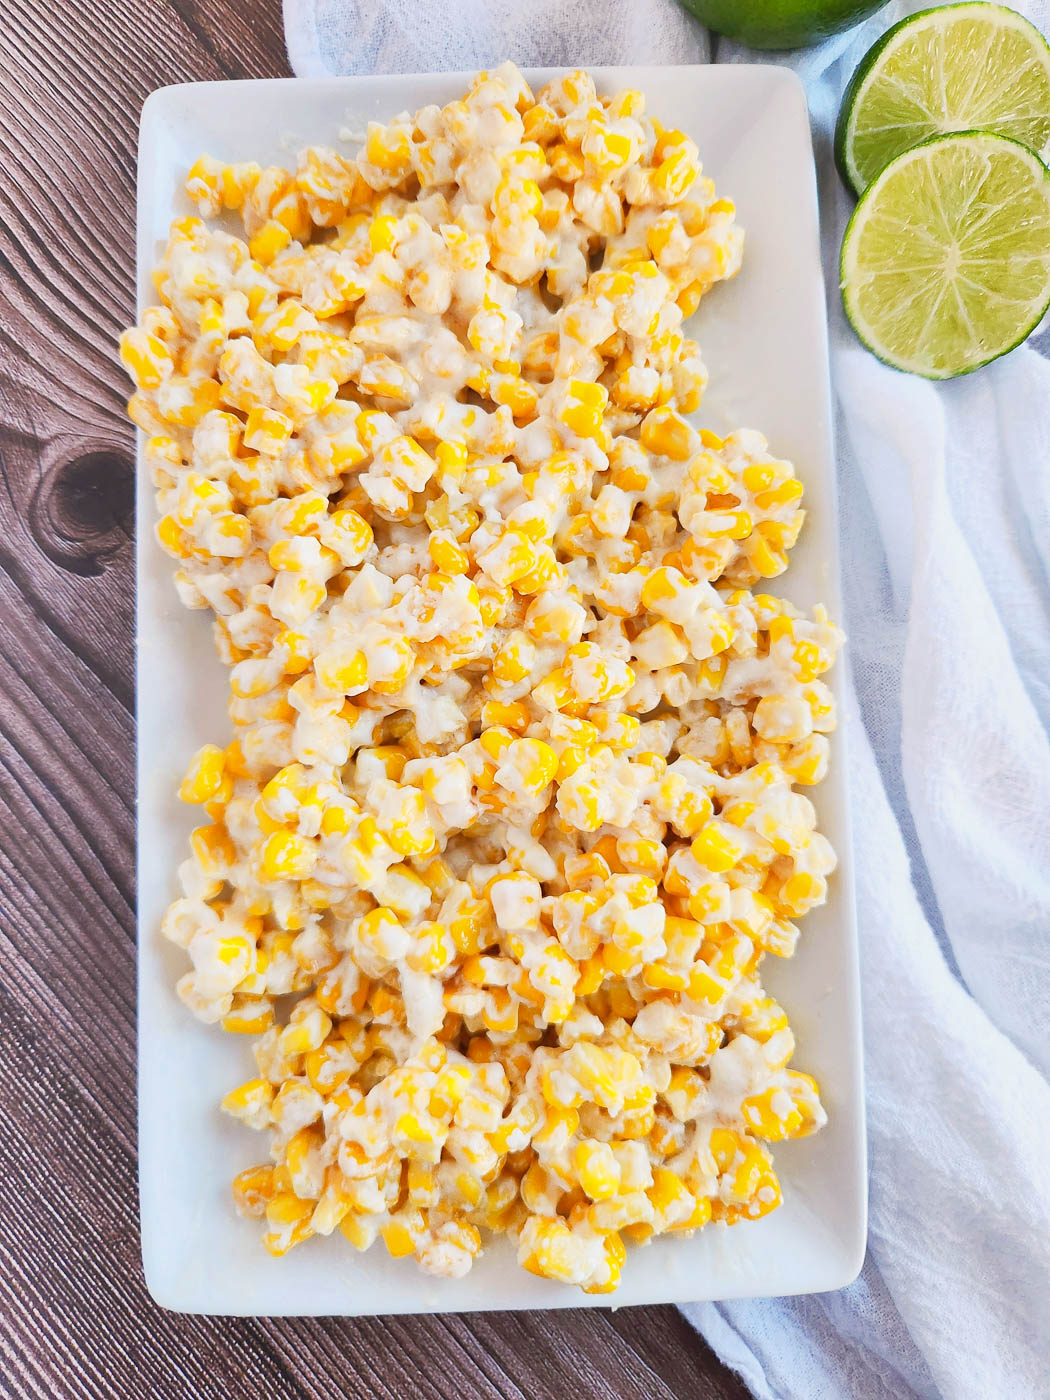 Top down view of a white serving dish of Mexican street corn